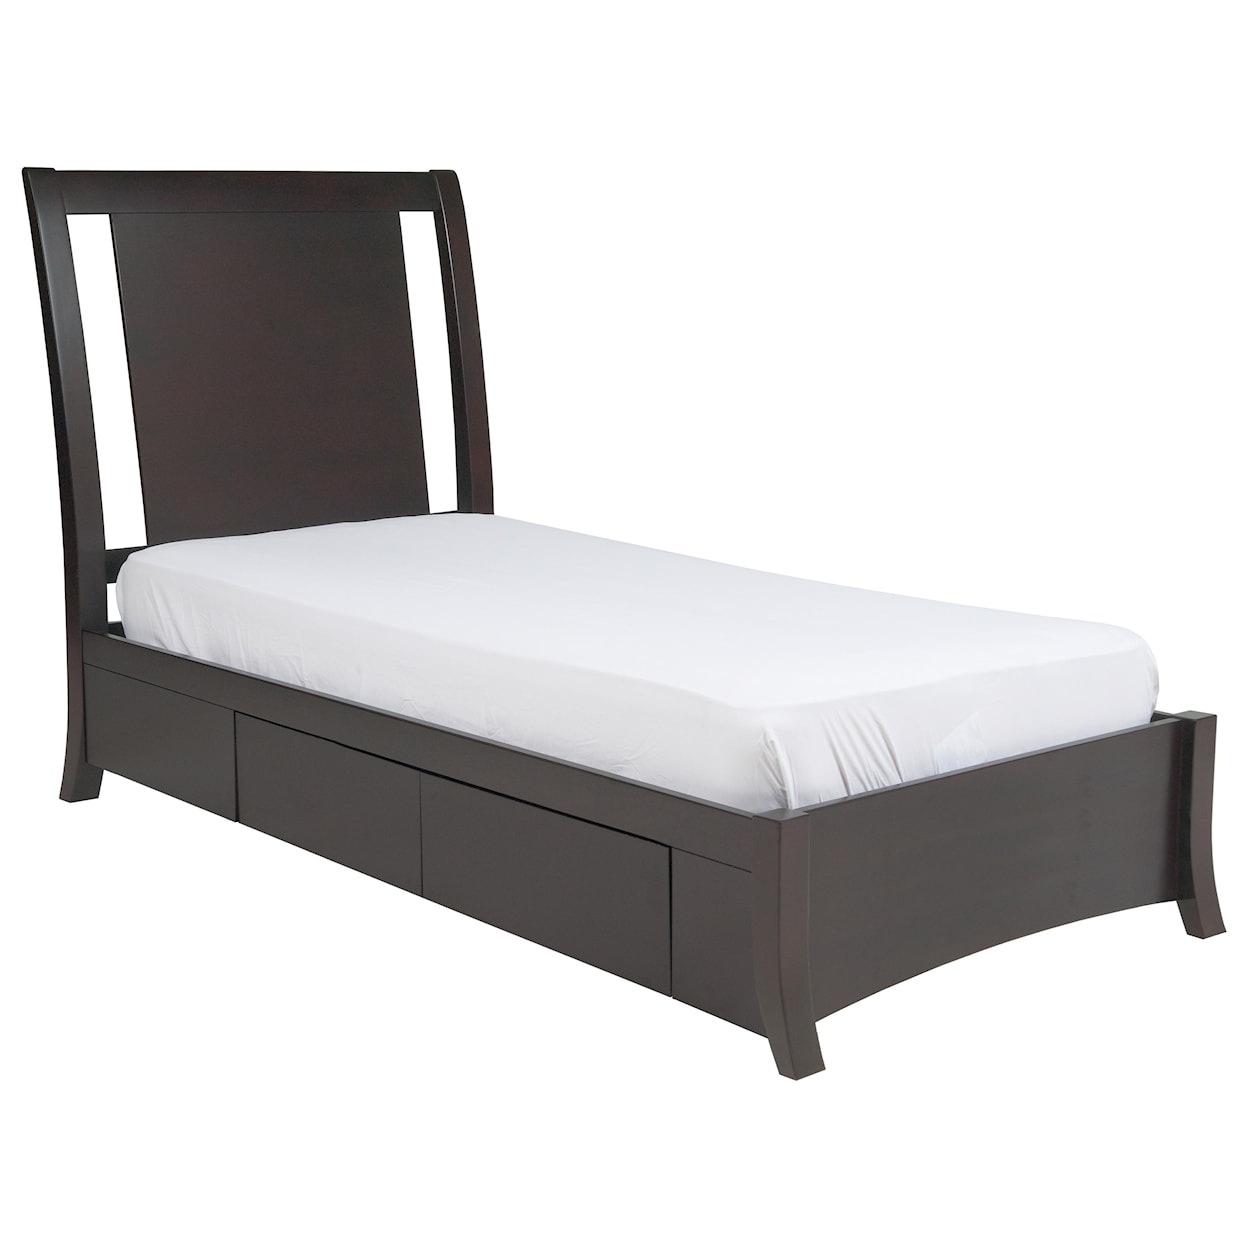 Modus International Nevis Twin Low Profile Bed with Storage